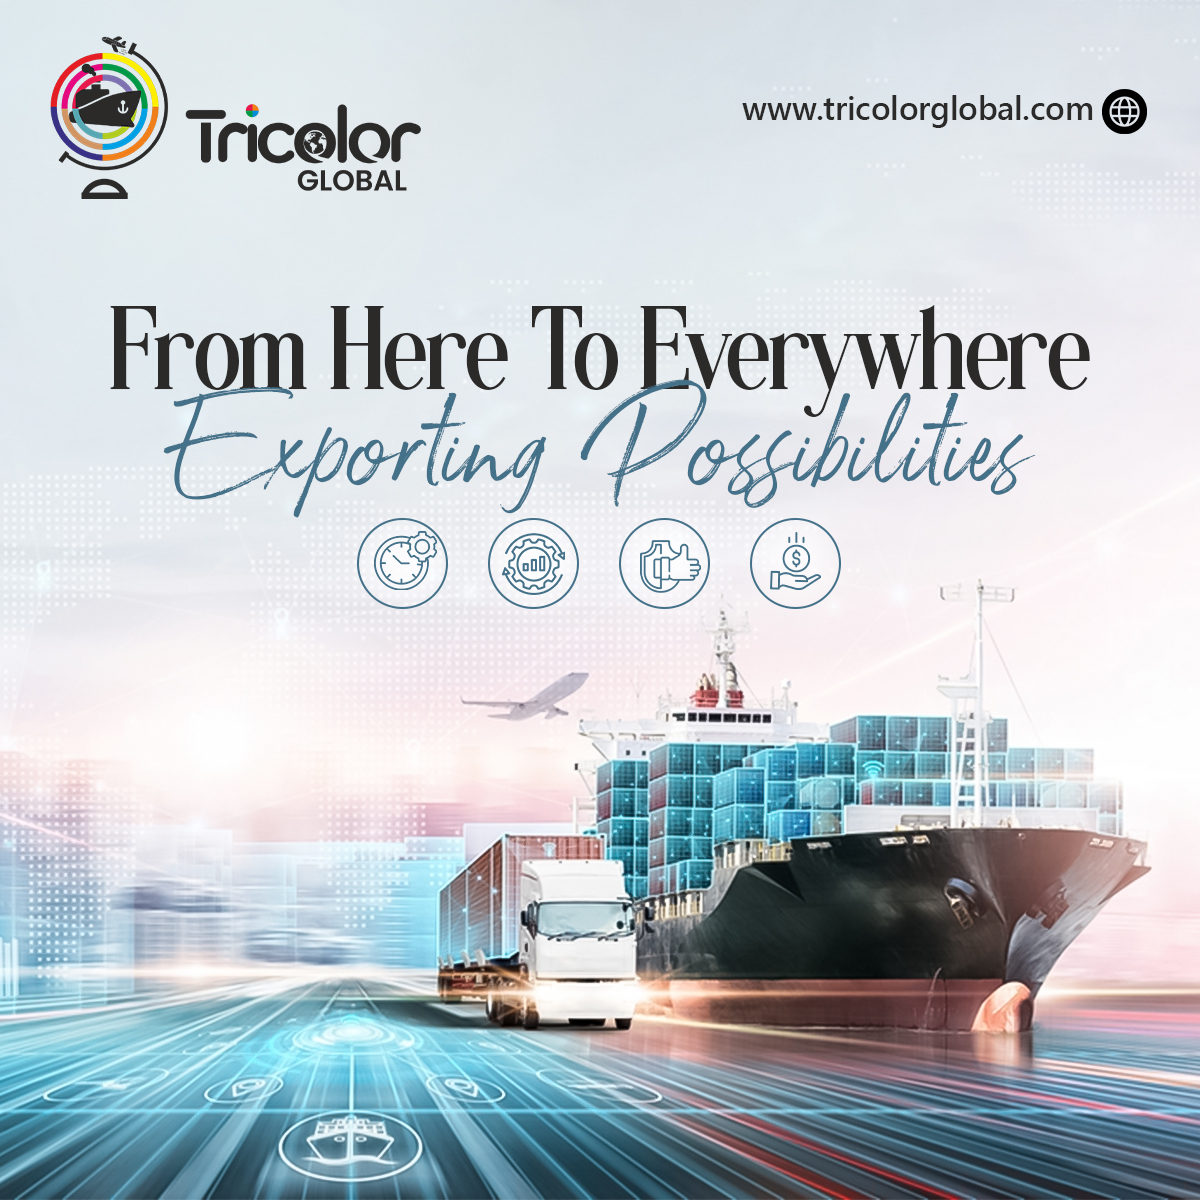 We're thrilled to announce that TricolorGlobal is now exporting top-quality Indian products worldwide! 

#TricolorGlobal #ExportingExcellence #IndianProducts #GlobalMarketplace 

tricolorglobal.com

#Exporting #GlobalExpansion #TradeOpportunities #GrowYourBusiness